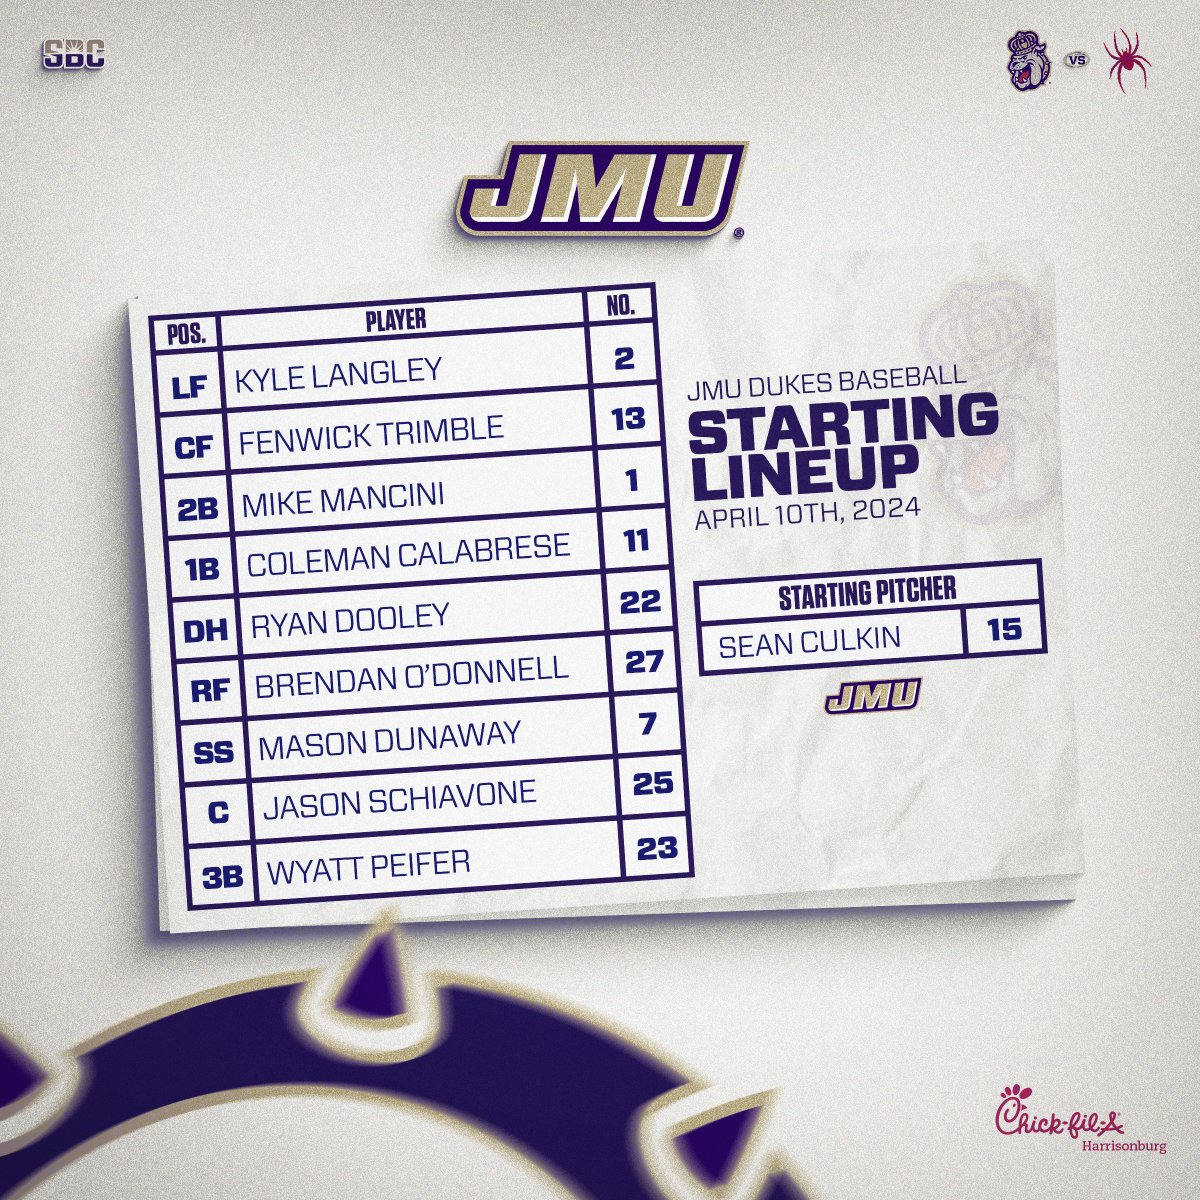 Some Commonwealth baseball coming at you on your Wednesday night. #GoDukes